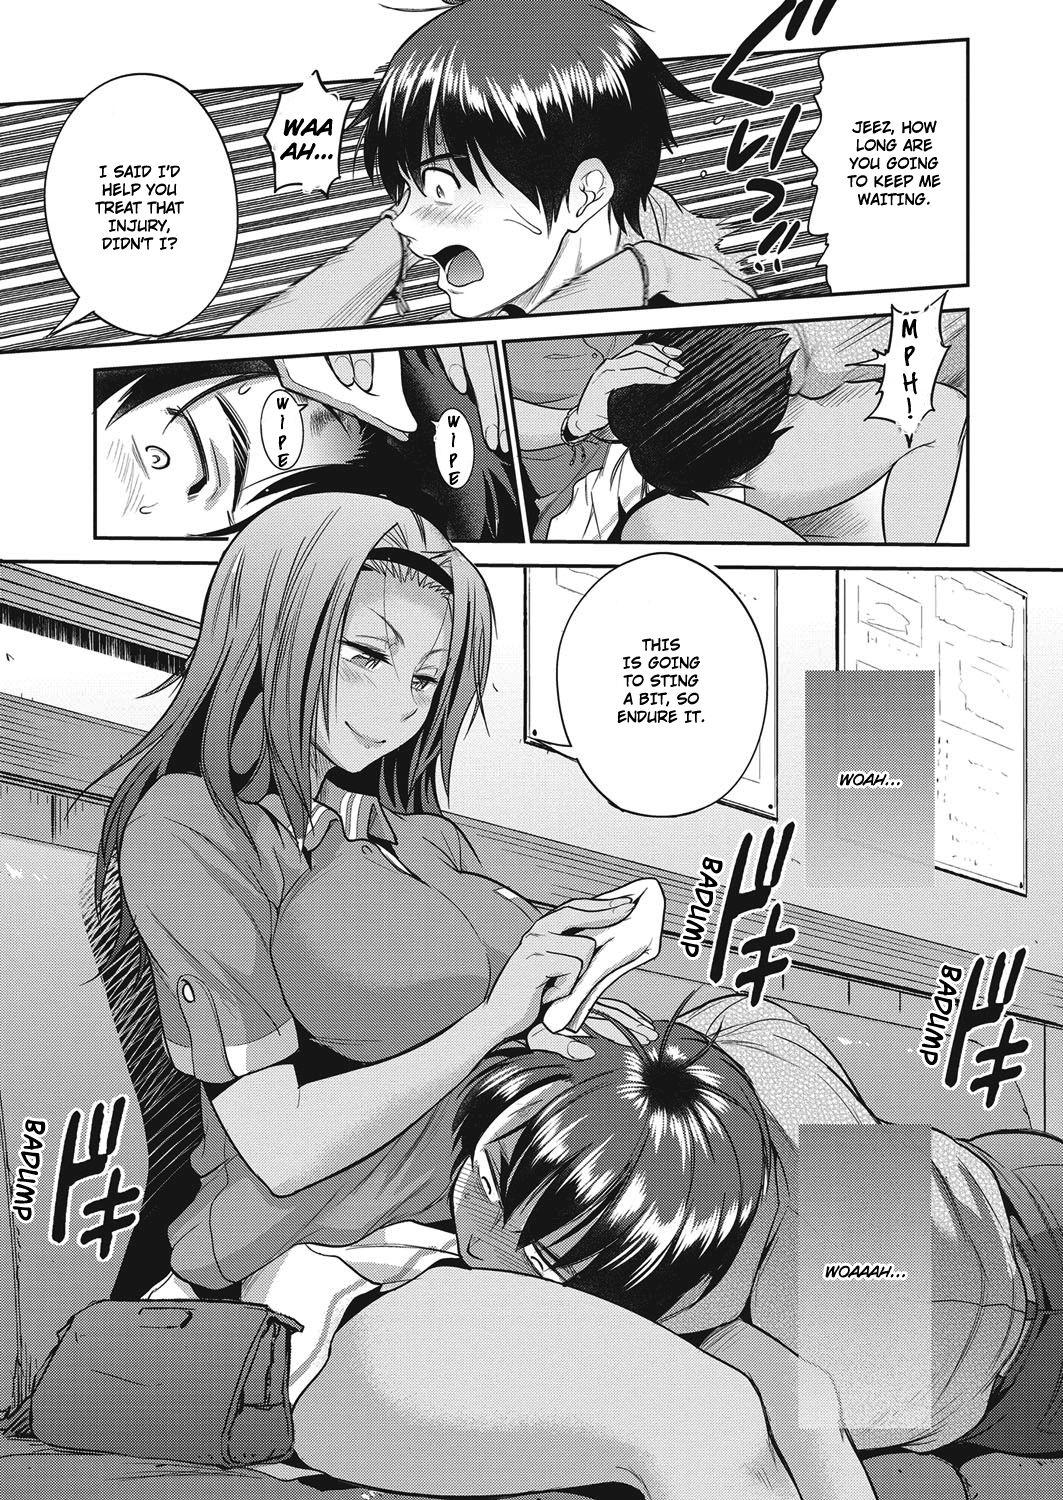 Thief [DISTANCE] Joshi Lacu! - Girls Lacrosse Club ~2 Years Later~ Ch. 3 (COMIC ExE 04) [English] [TripleSevenScans] [Digital] Oiled - Page 3